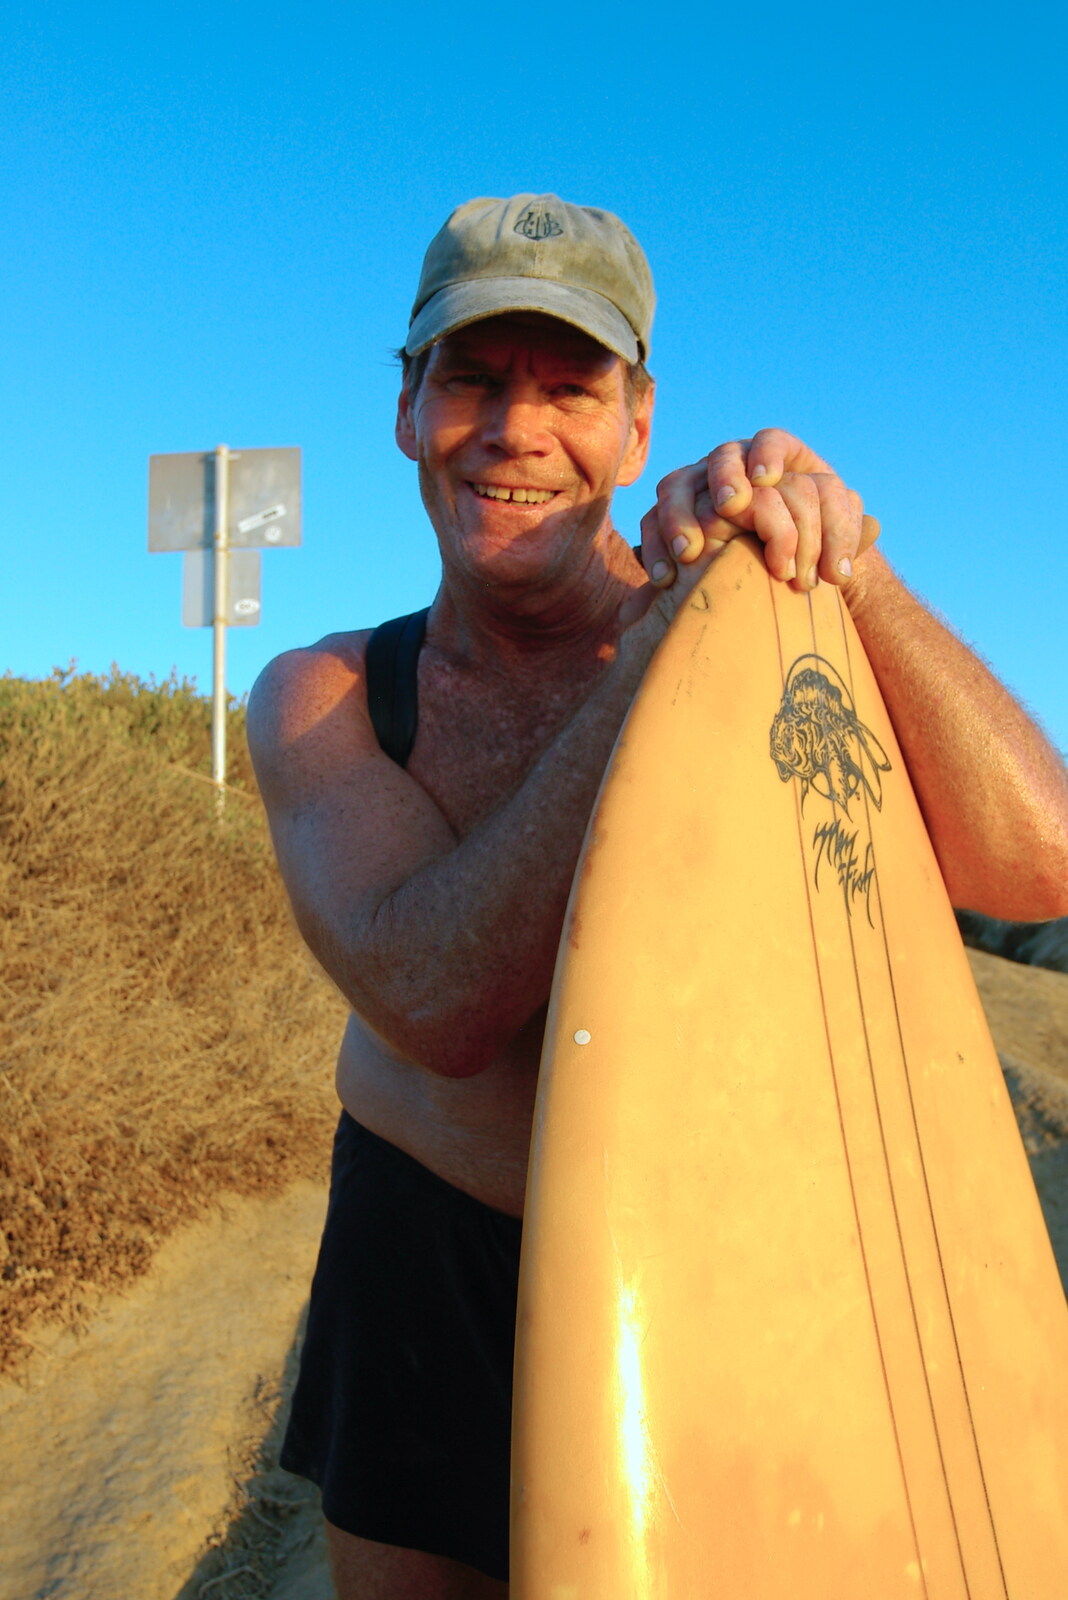 An old surfer dude with his board from San Diego Four, California, US - 22nd September 2005